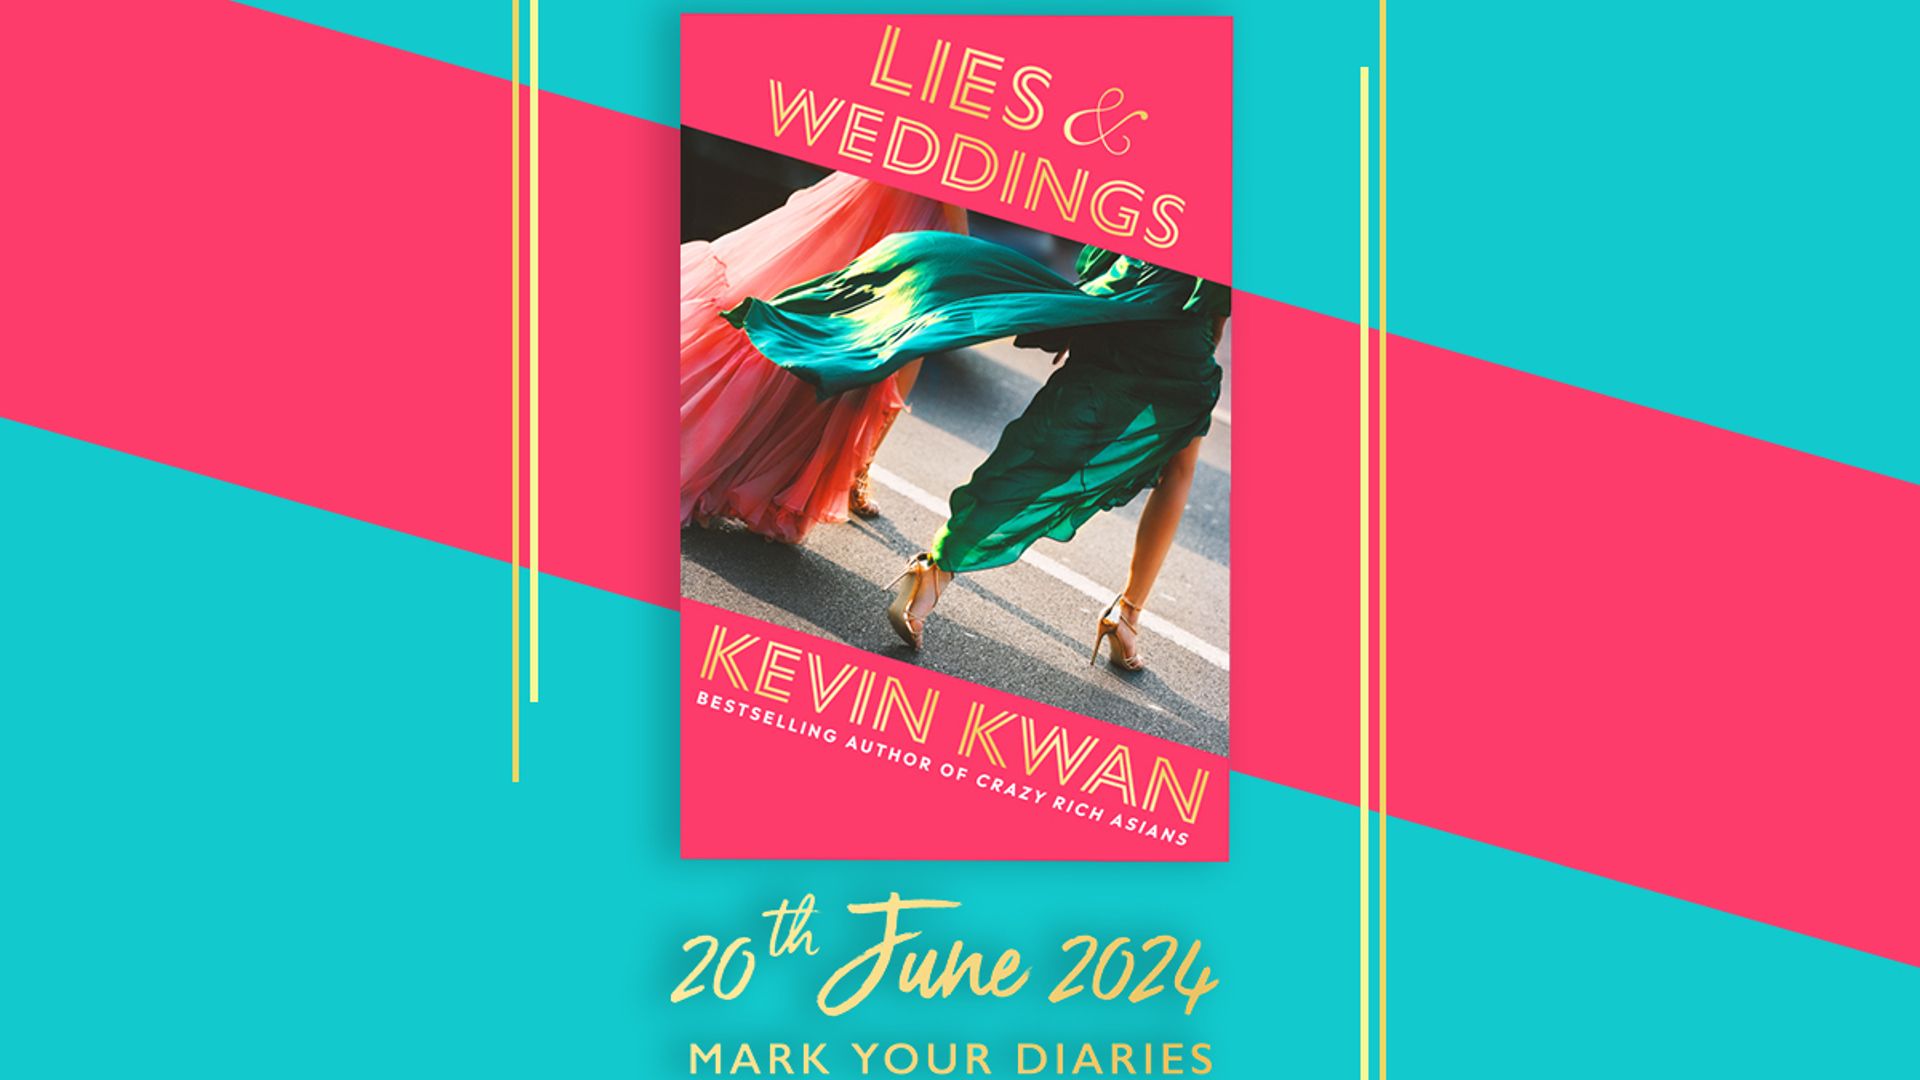 Lies and Weddings by Kevin Kwan 